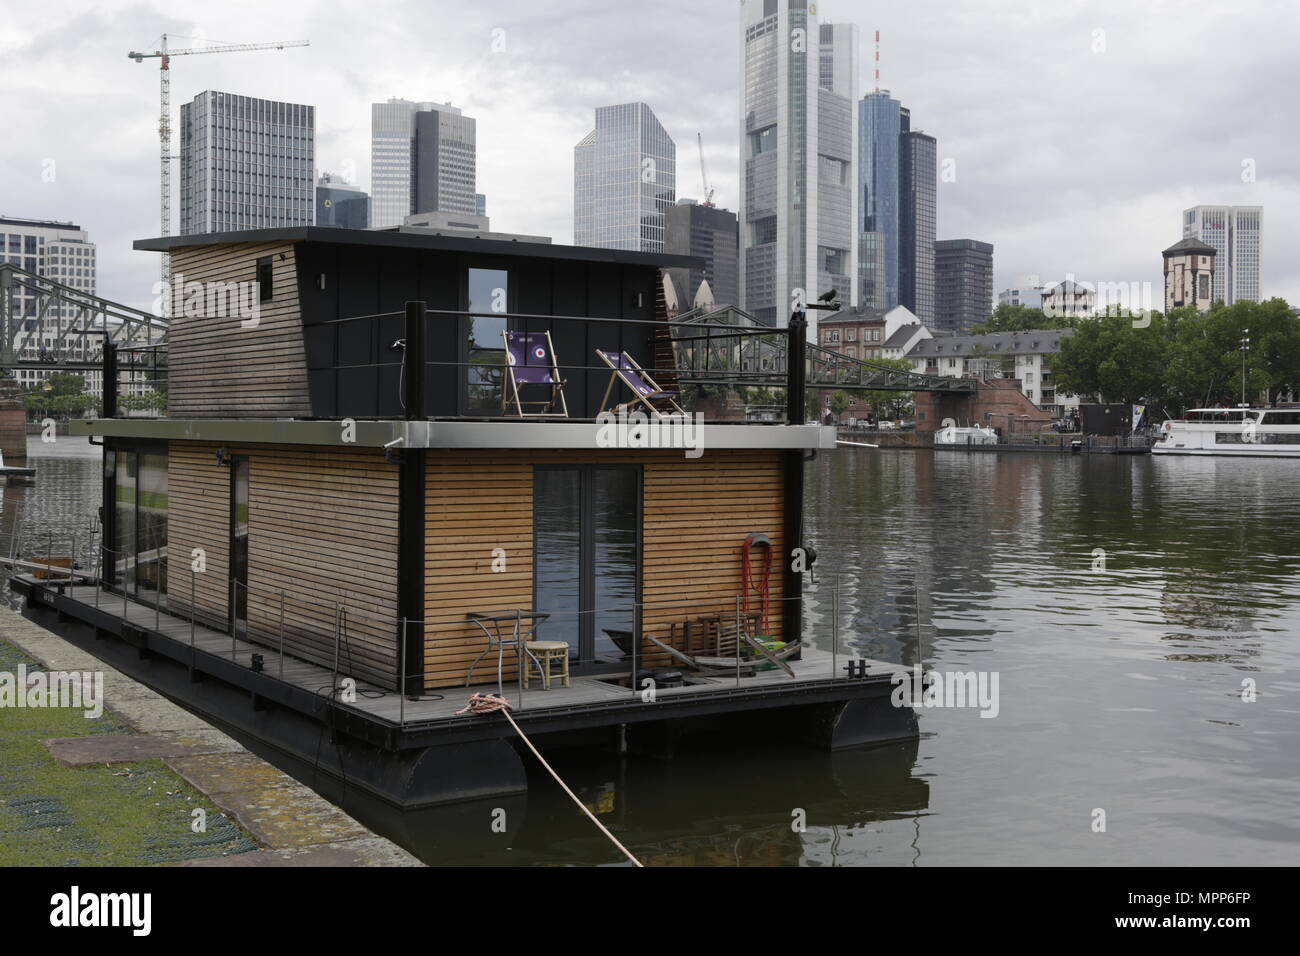 Frankfurt, Germany. 24th May 2018. The houseboat of Leo Oswald is moored at the quays at the river Rain, opposite downtown Frankfurt, with the Frankfurt Skyline in the background. 4 new episodes of the relaunch of the long running TV series 'Ein Fall fuer zwei’ (A case for two) are being filmed in Frankfurt for the German state TV broadcaster ZDF (Zweites Deutsches Fernsehen). It stars Antoine Monot, Jr. as defence attorney Benjamin ‘Benni’ Hornberg and Wanja Mues as private investigator Leo Oswald. The episodes are directed by Thomas Nennstiel. The episodes are set to air in October. Stock Photo